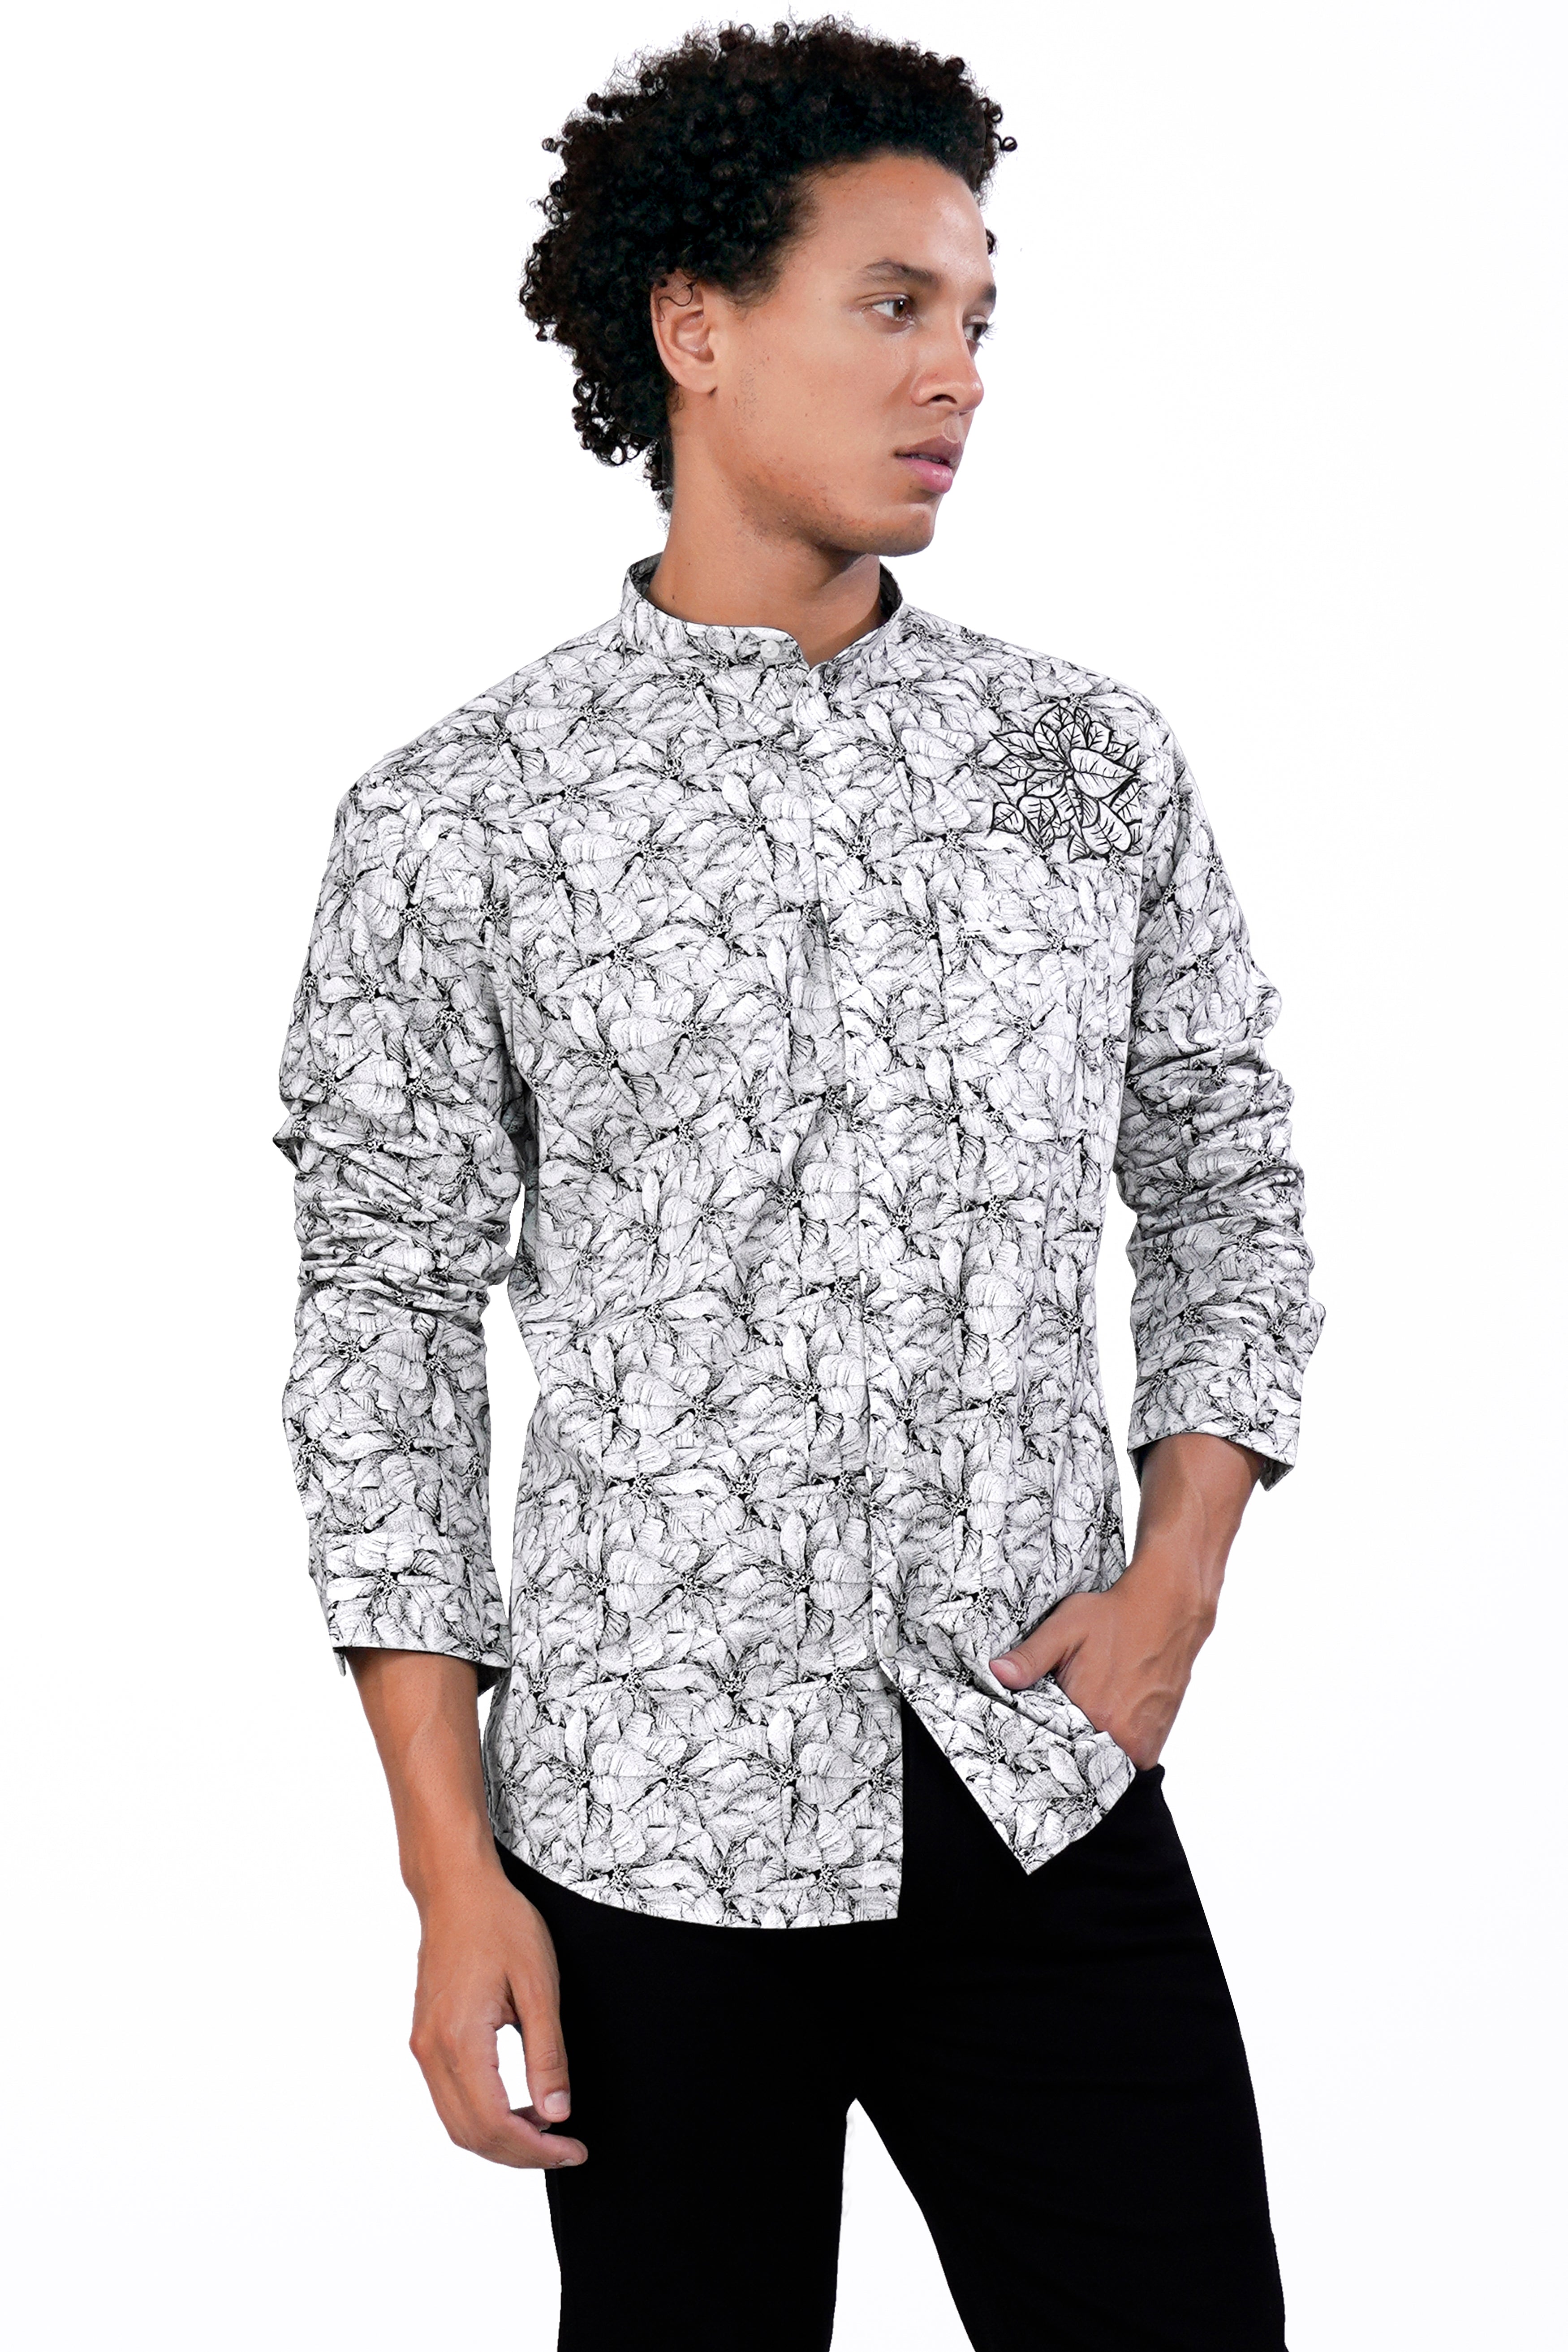 Jade Black and white Floral Printed with Hand Painted Twill Premium Cotton Designer Shirt 6254-M-ART02-38, 6254-M-ART02-H-38, 6254-M-ART02-39, 6254-M-ART02-H-39, 6254-M-ART02-40, 6254-M-ART02-H-40, 6254-M-ART02-42, 6254-M-ART02-H-42, 6254-M-ART02-44, 6254-M-ART02-H-44, 6254-M-ART02-46, 6254-M-ART02-H-46, 6254-M-ART02-48, 6254-M-ART02-H-48, 6254-M-ART02-50, 6254-M-ART02-H-50, 6254-M-ART02-52, 6254-M-ART02-H-52